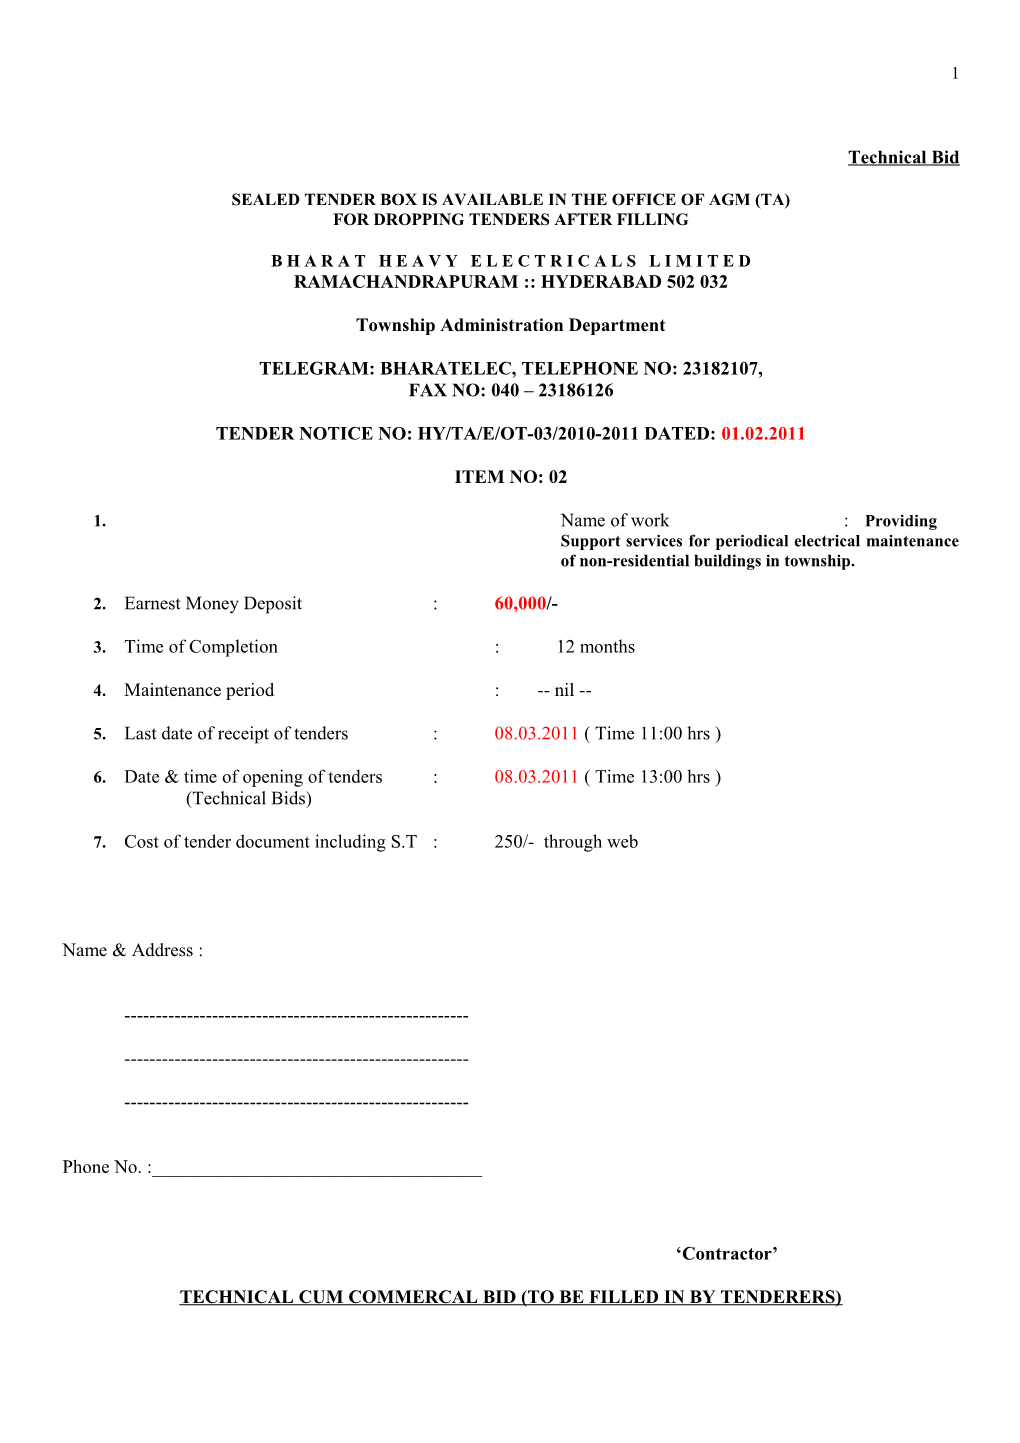 Sealed Tender Box Is Available in the Office of Agm (Ta)